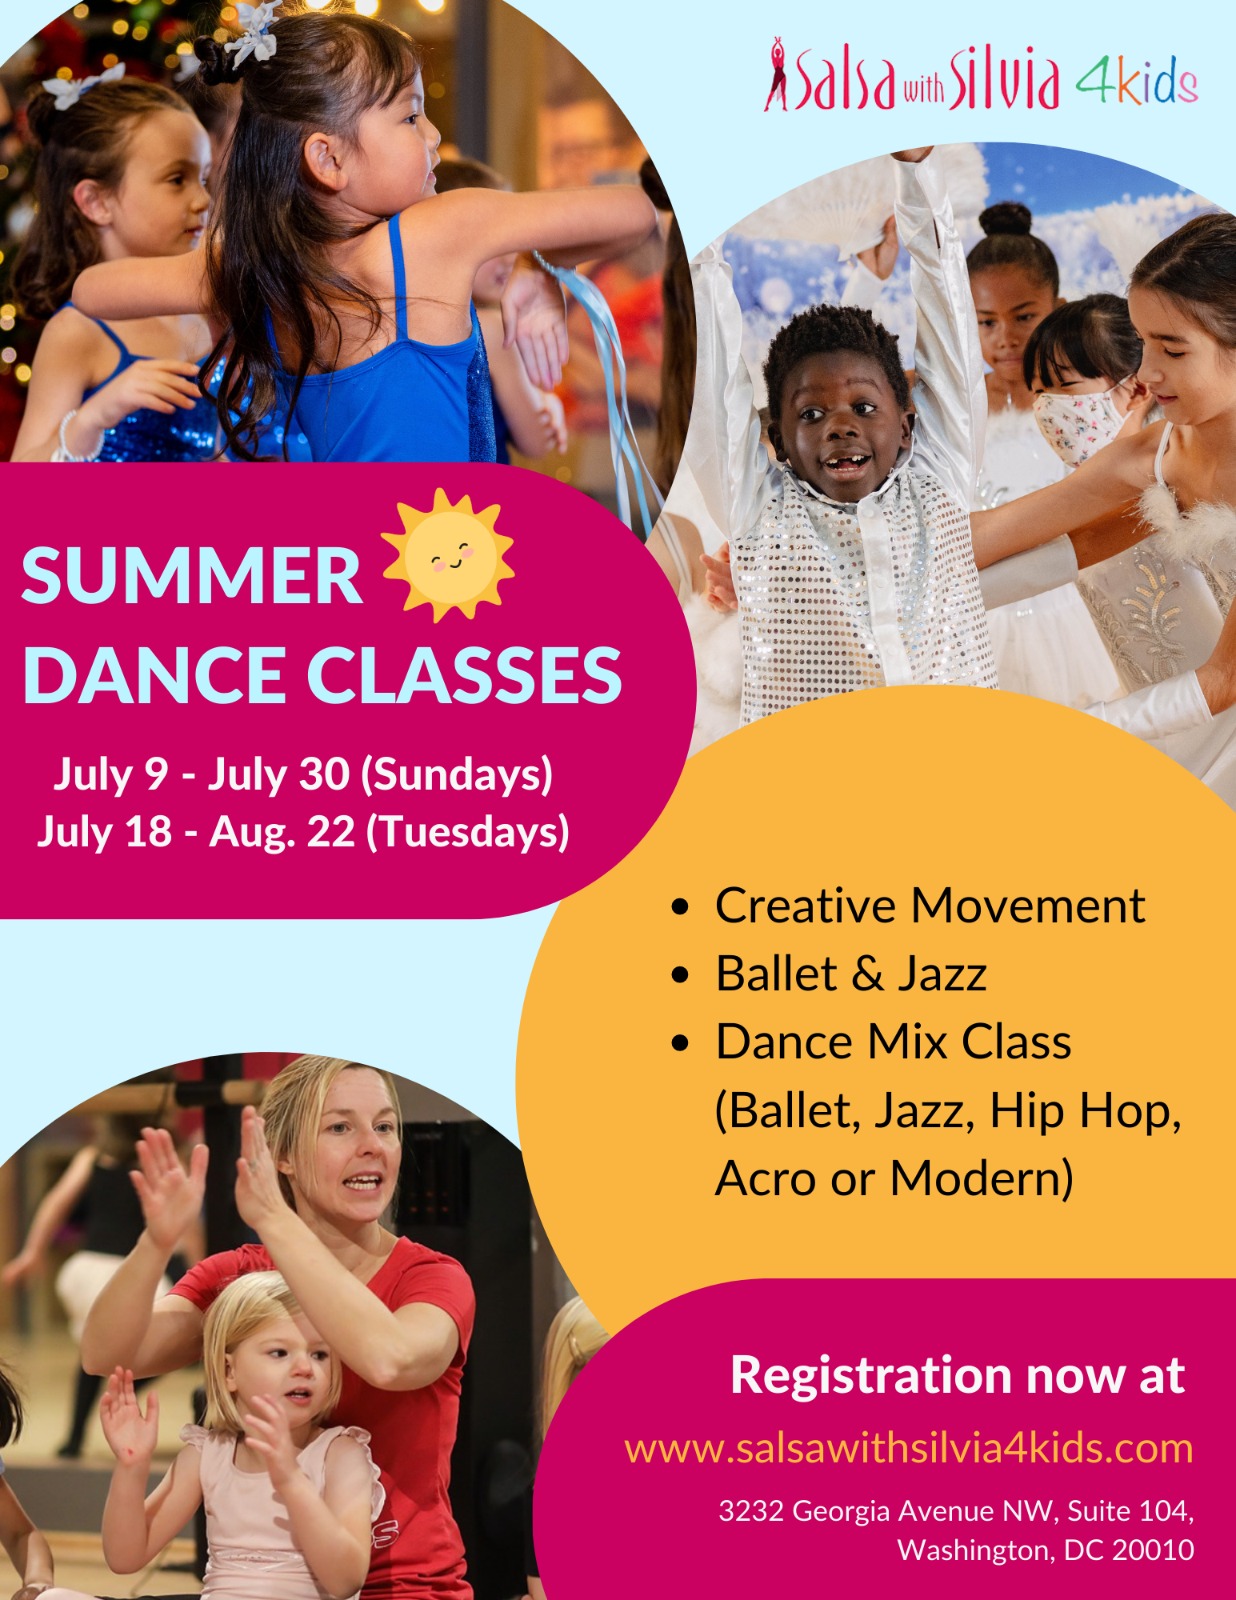 Salsa with Silvia 4kids Summer Sessions Summer dance classes 2023 in DC